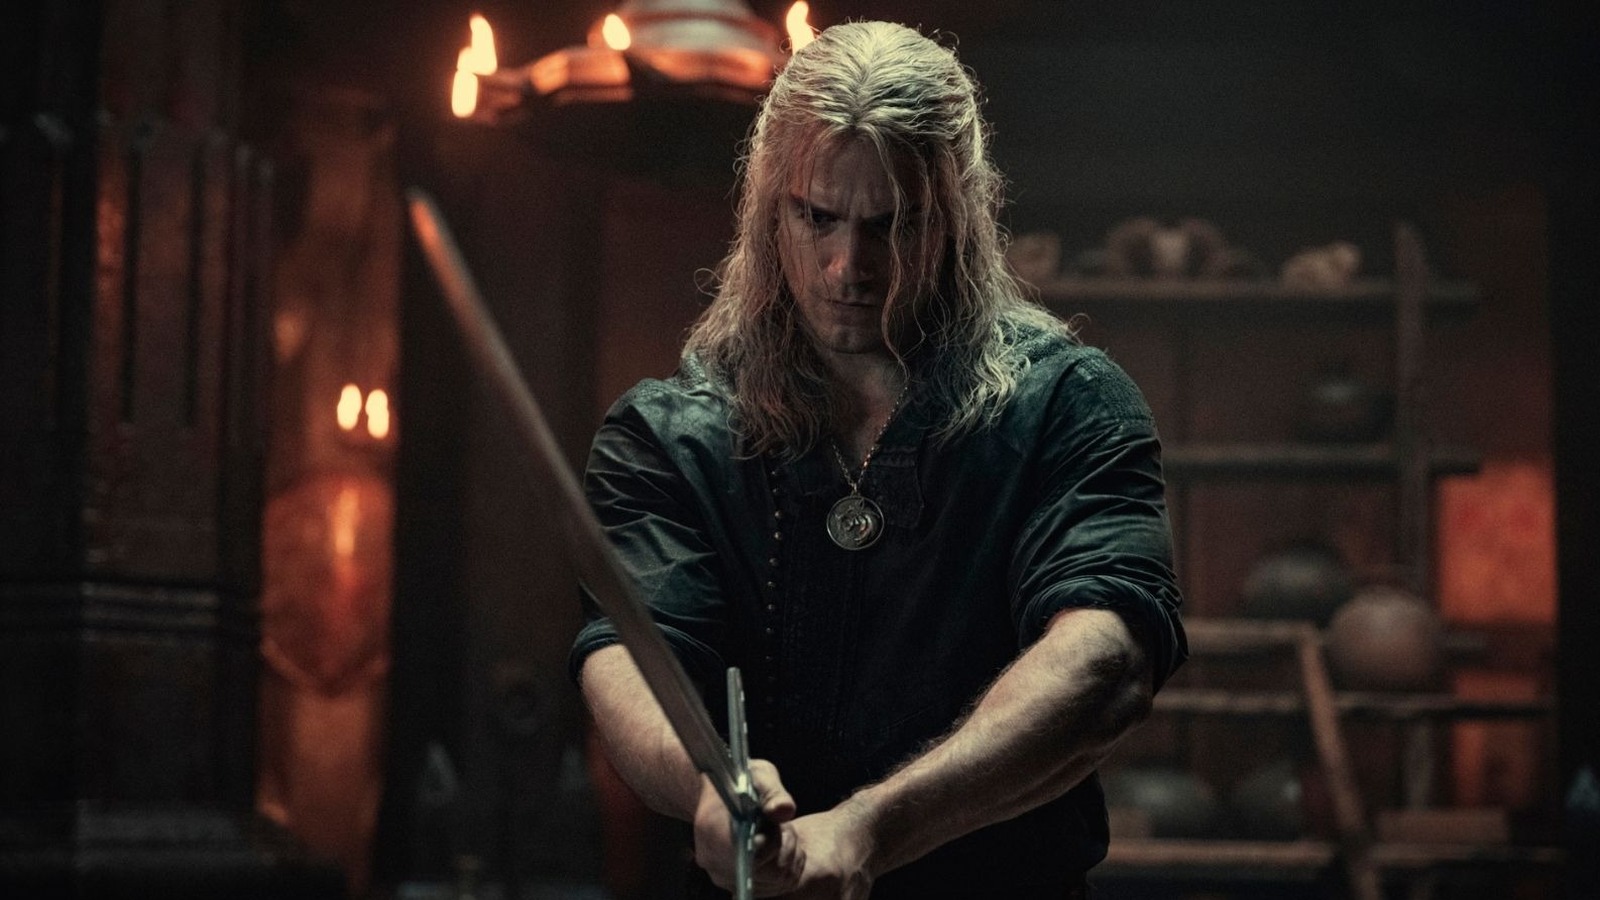 Who's the richest Witcher? Henry Cavill and Liam Hemsworth's net